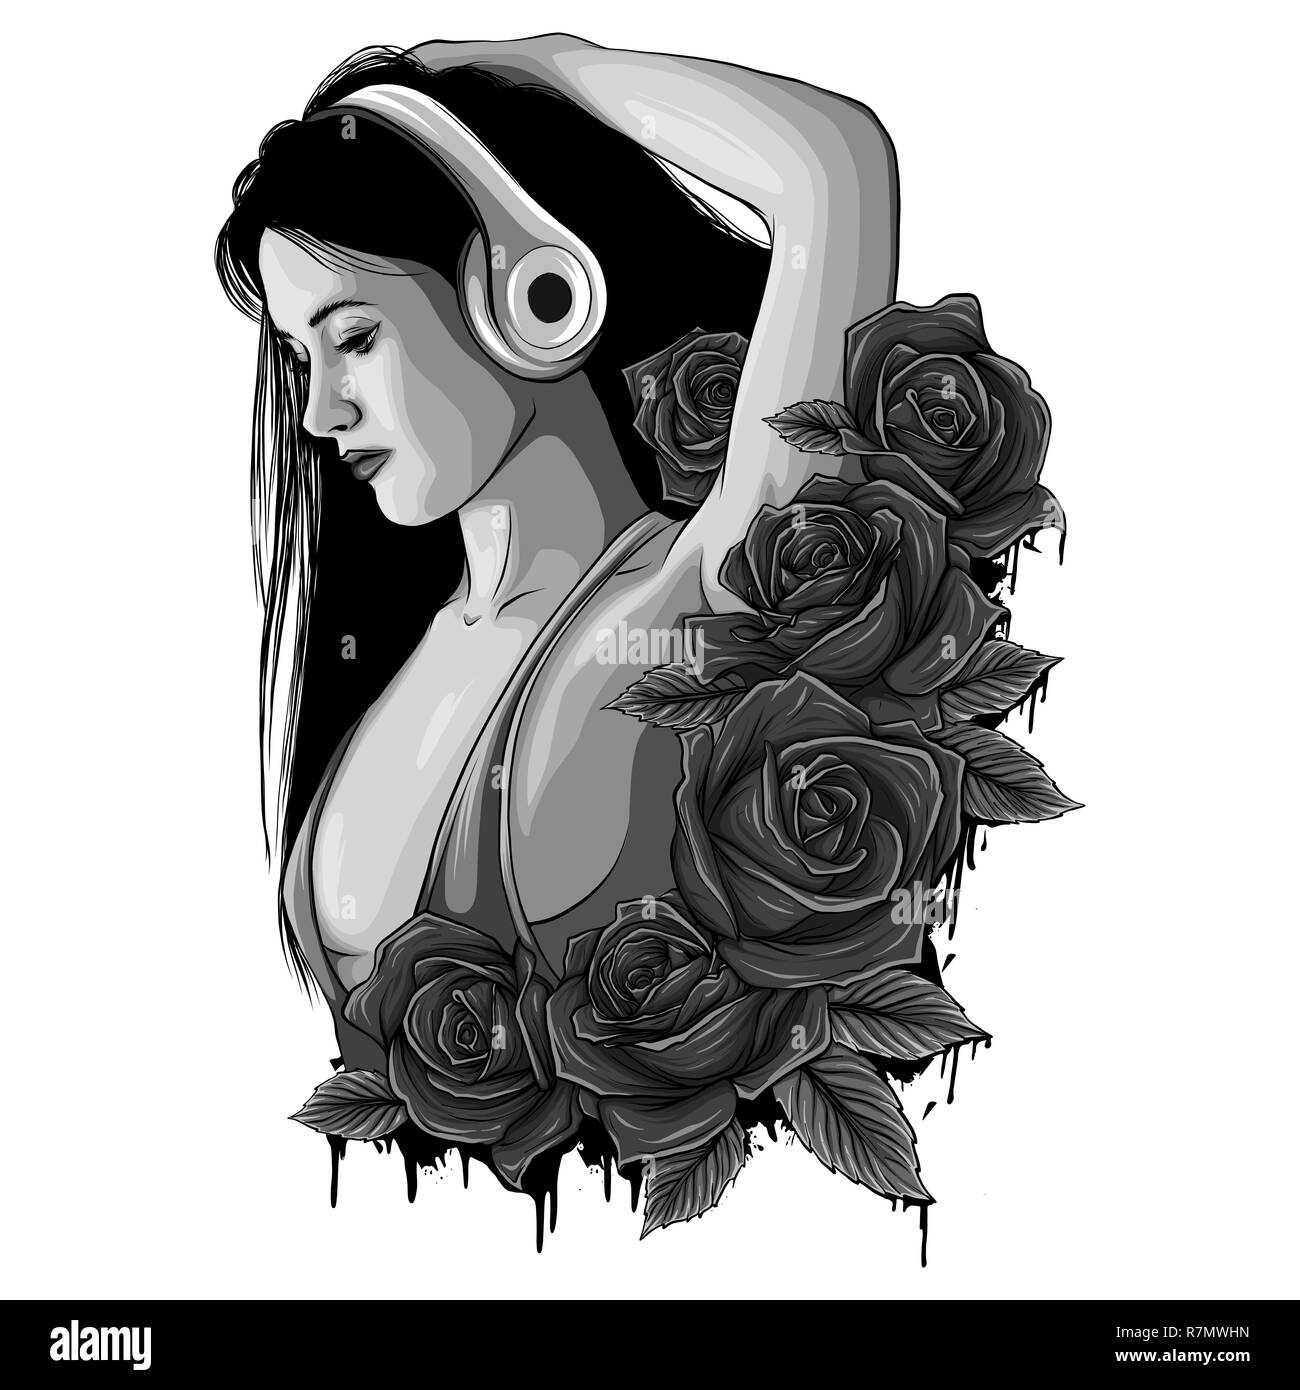 vecto illustration beautiful girl with headphones and roses Stock Photo